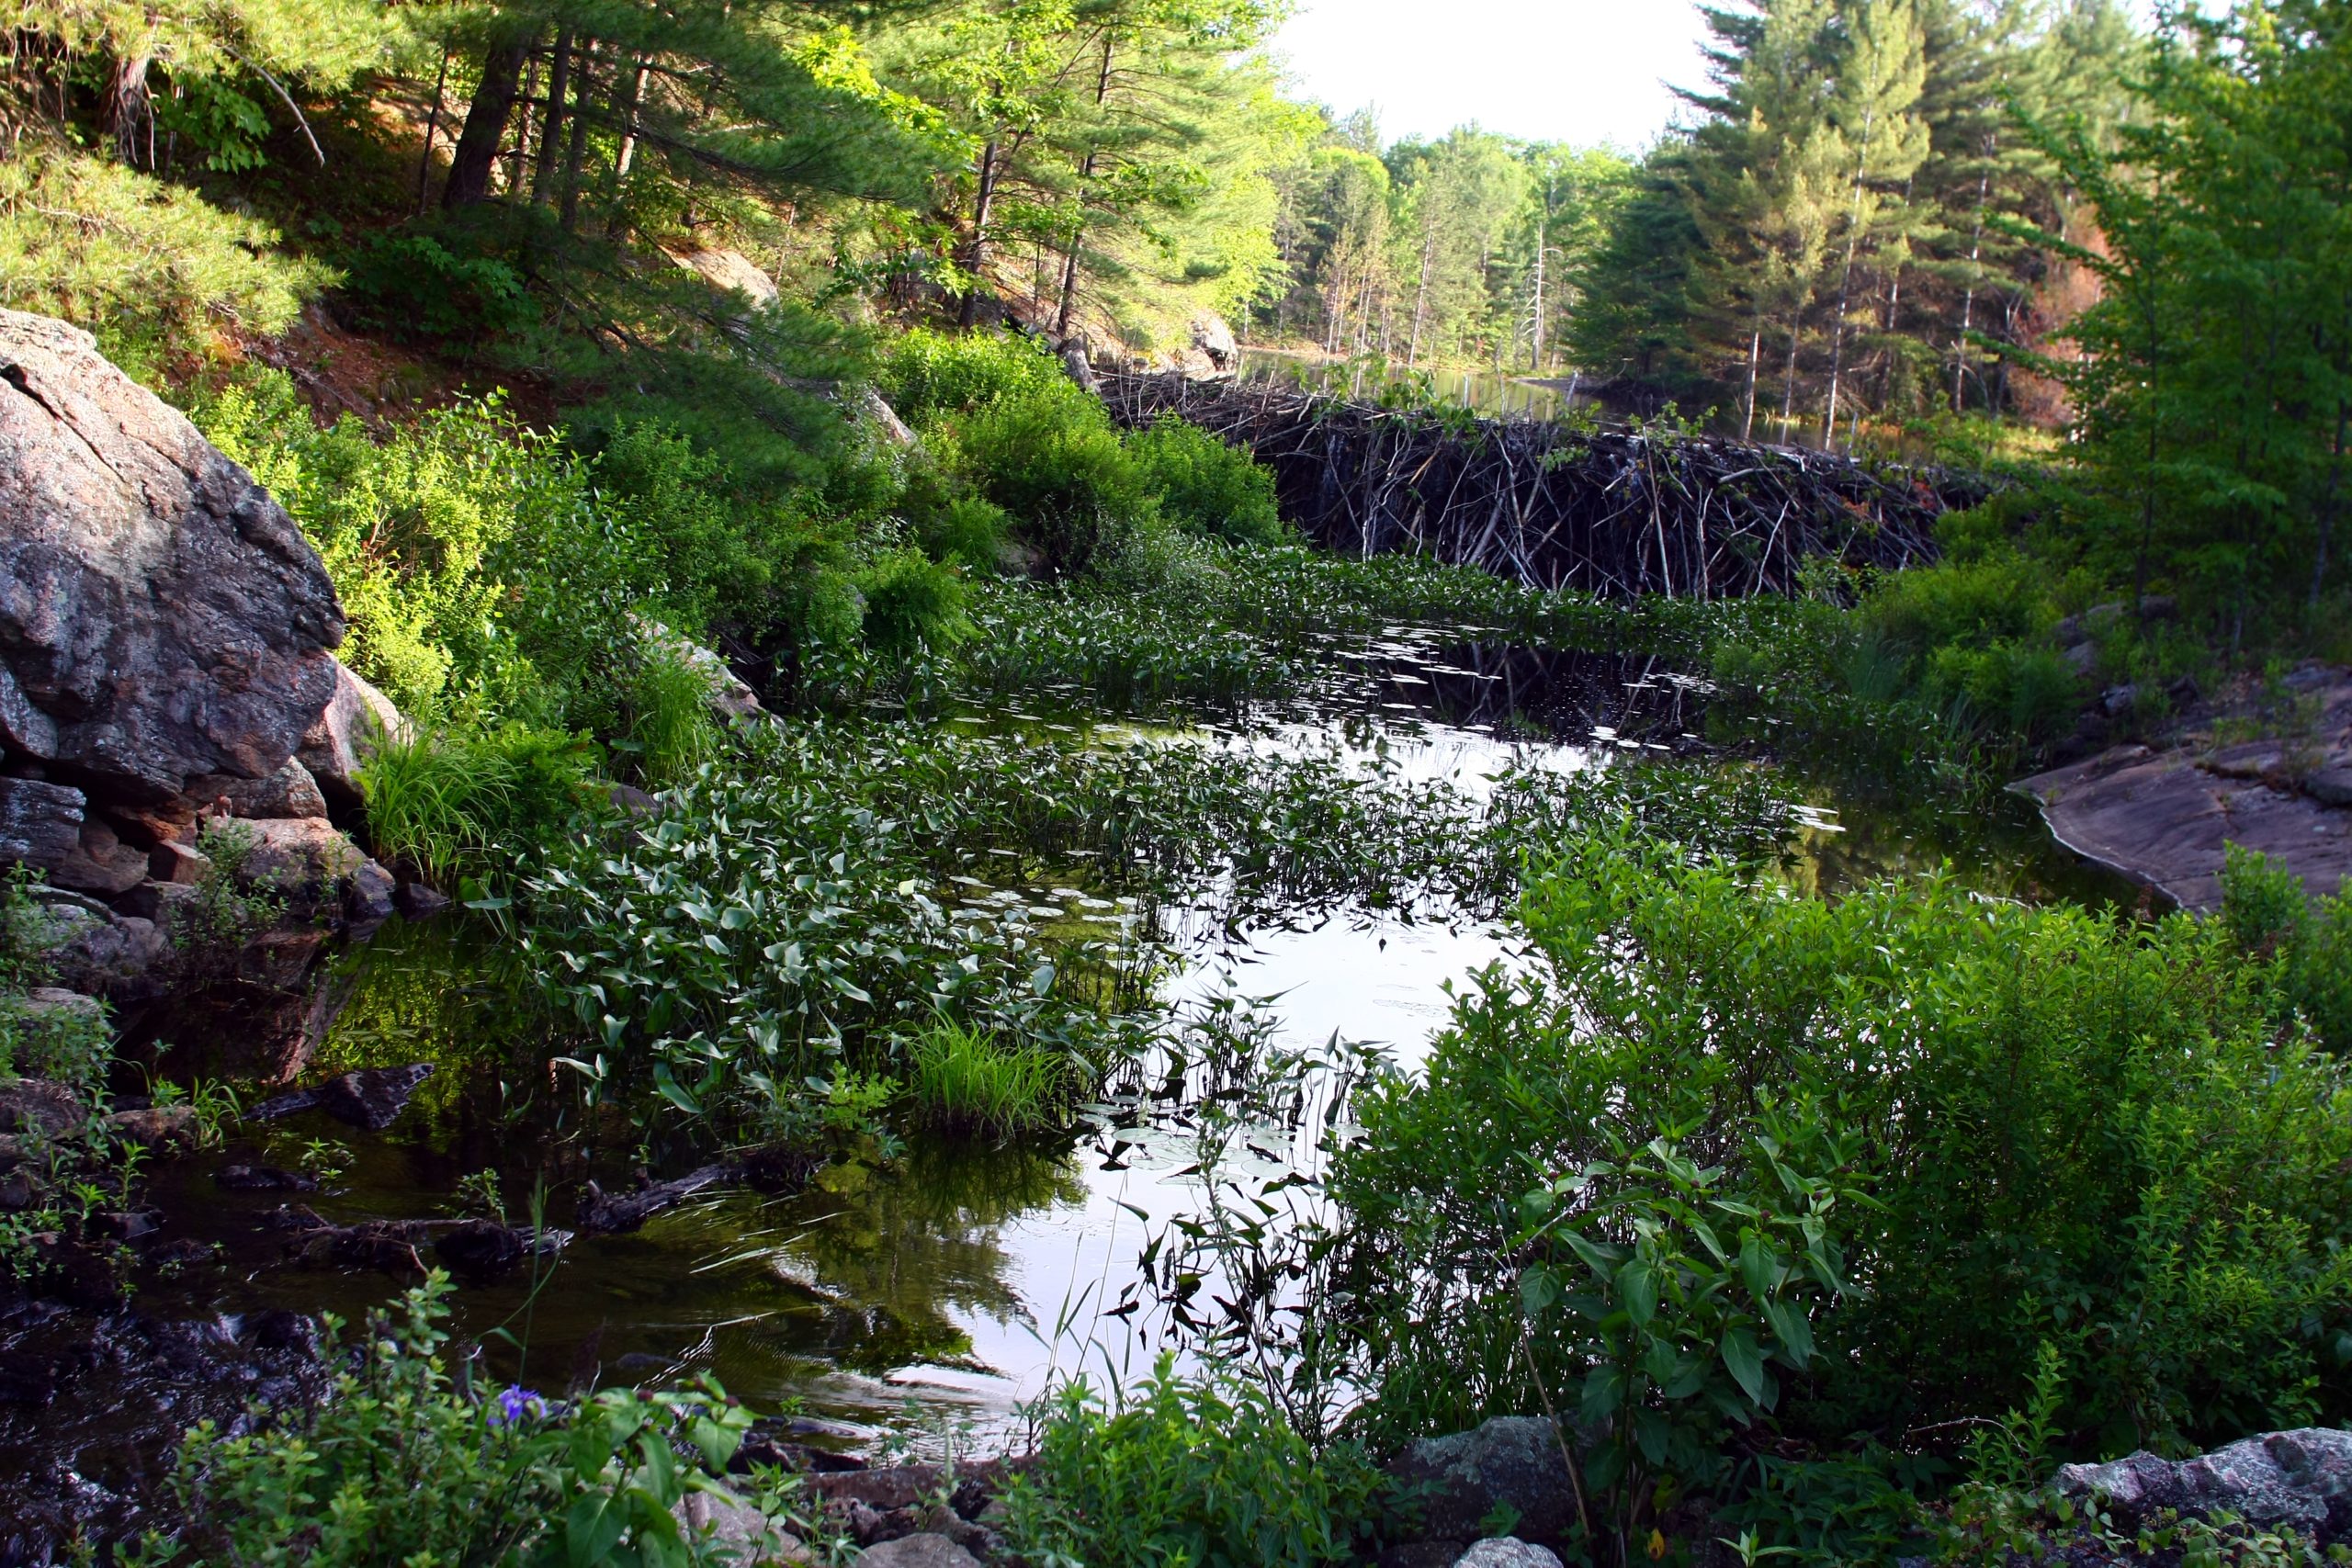 Photograph of a green and rocky forest in Canada, showing a beaver dam almost 2.5m high